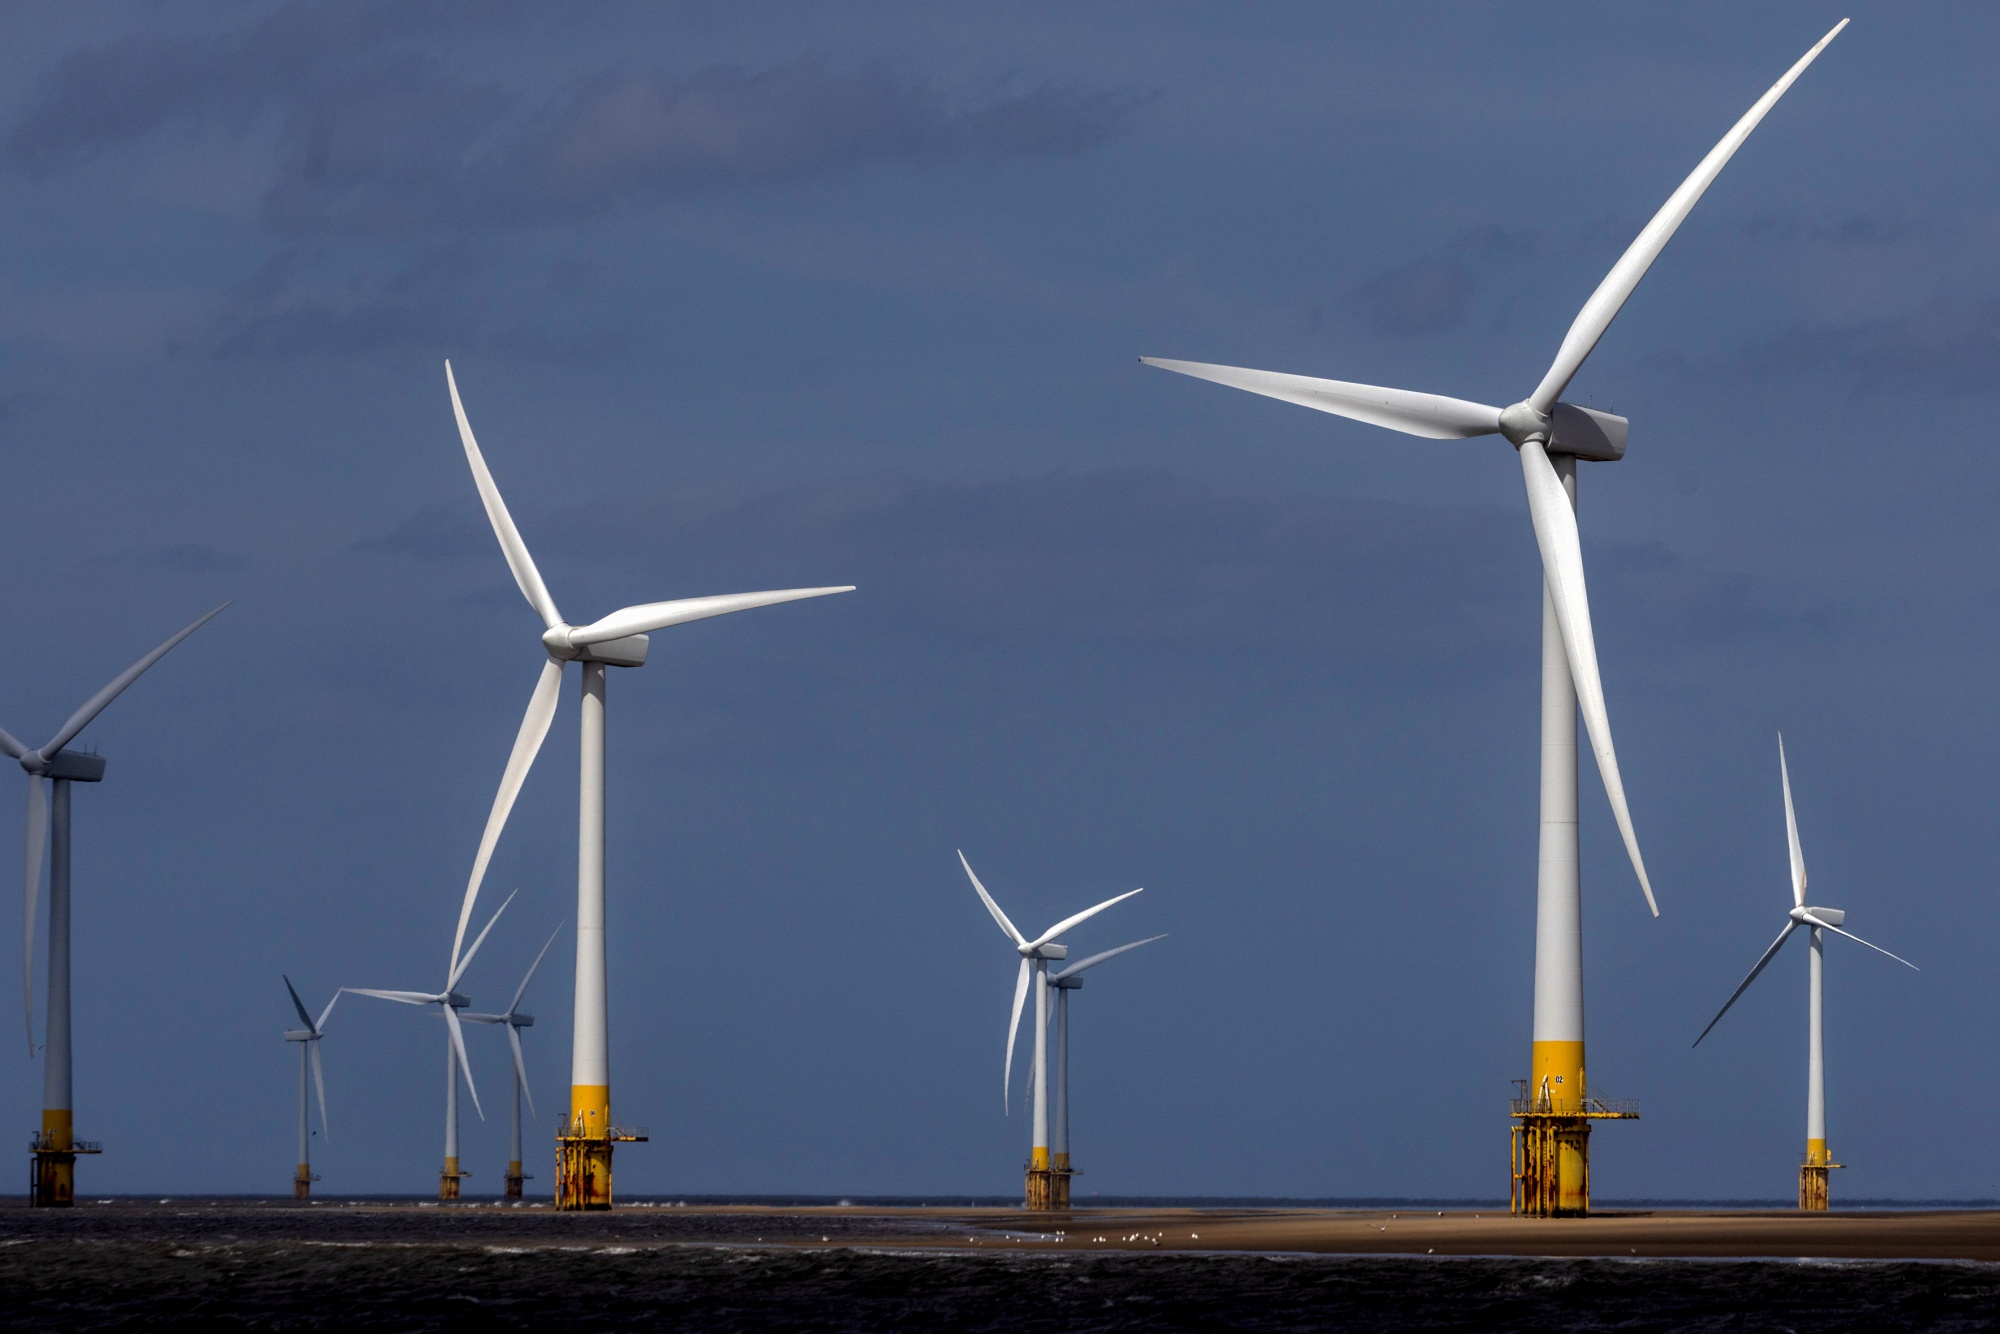 clean energy: UK secures £85 million to build world's most